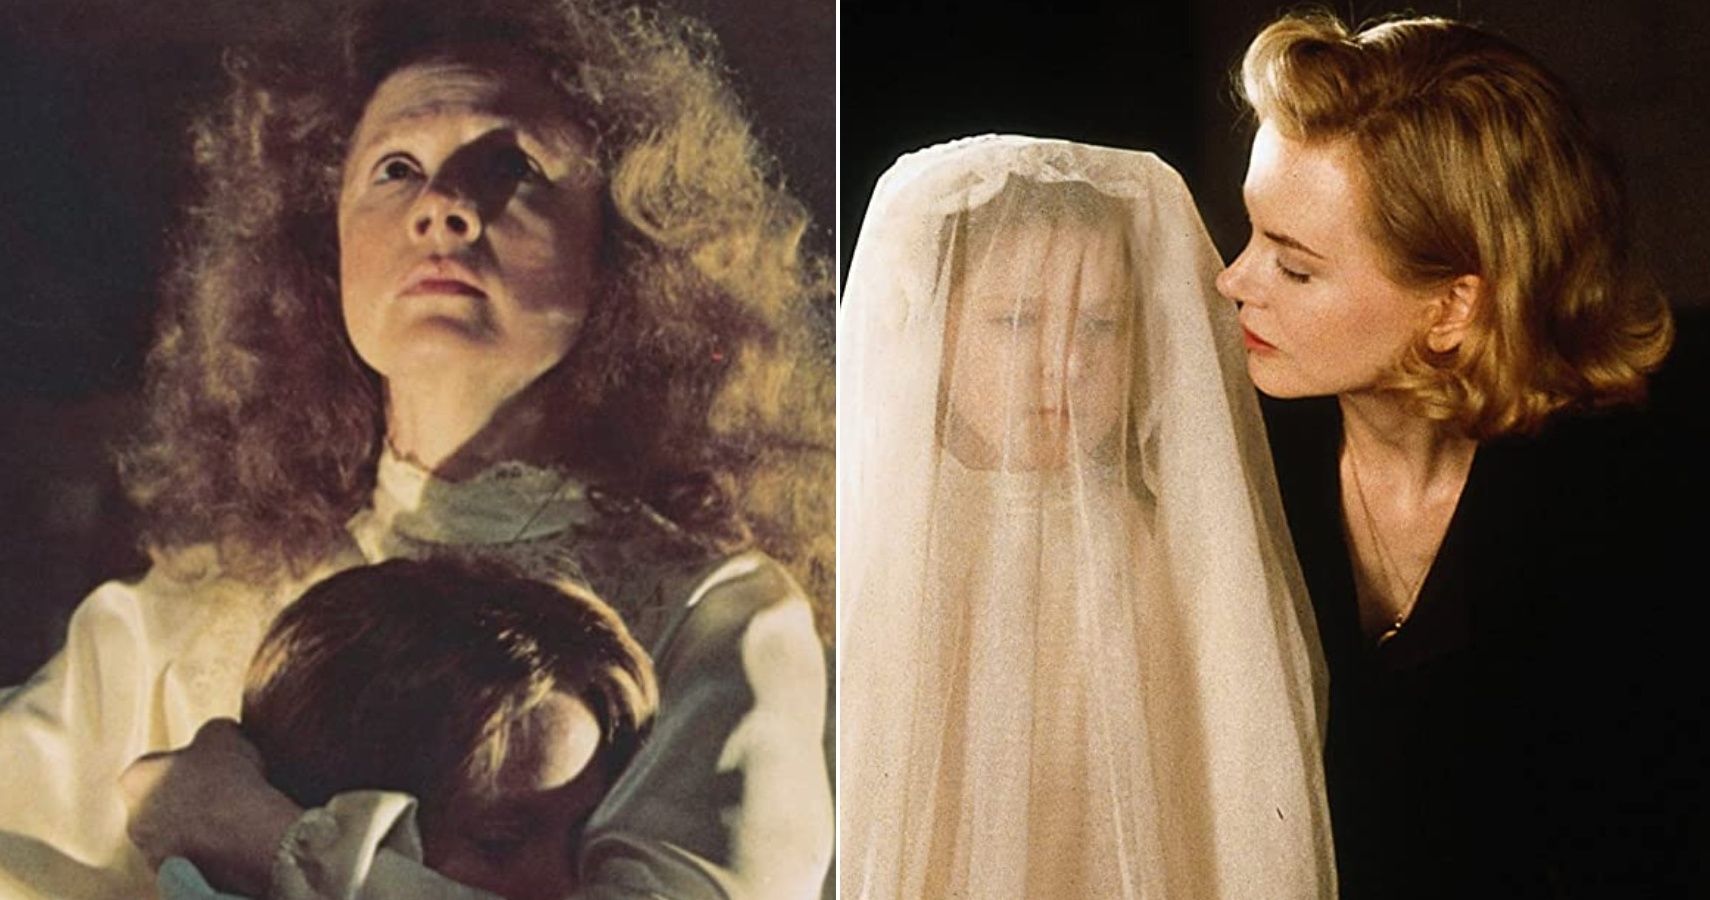 The 10 Best Supernatural Horror Movies According To Imdb